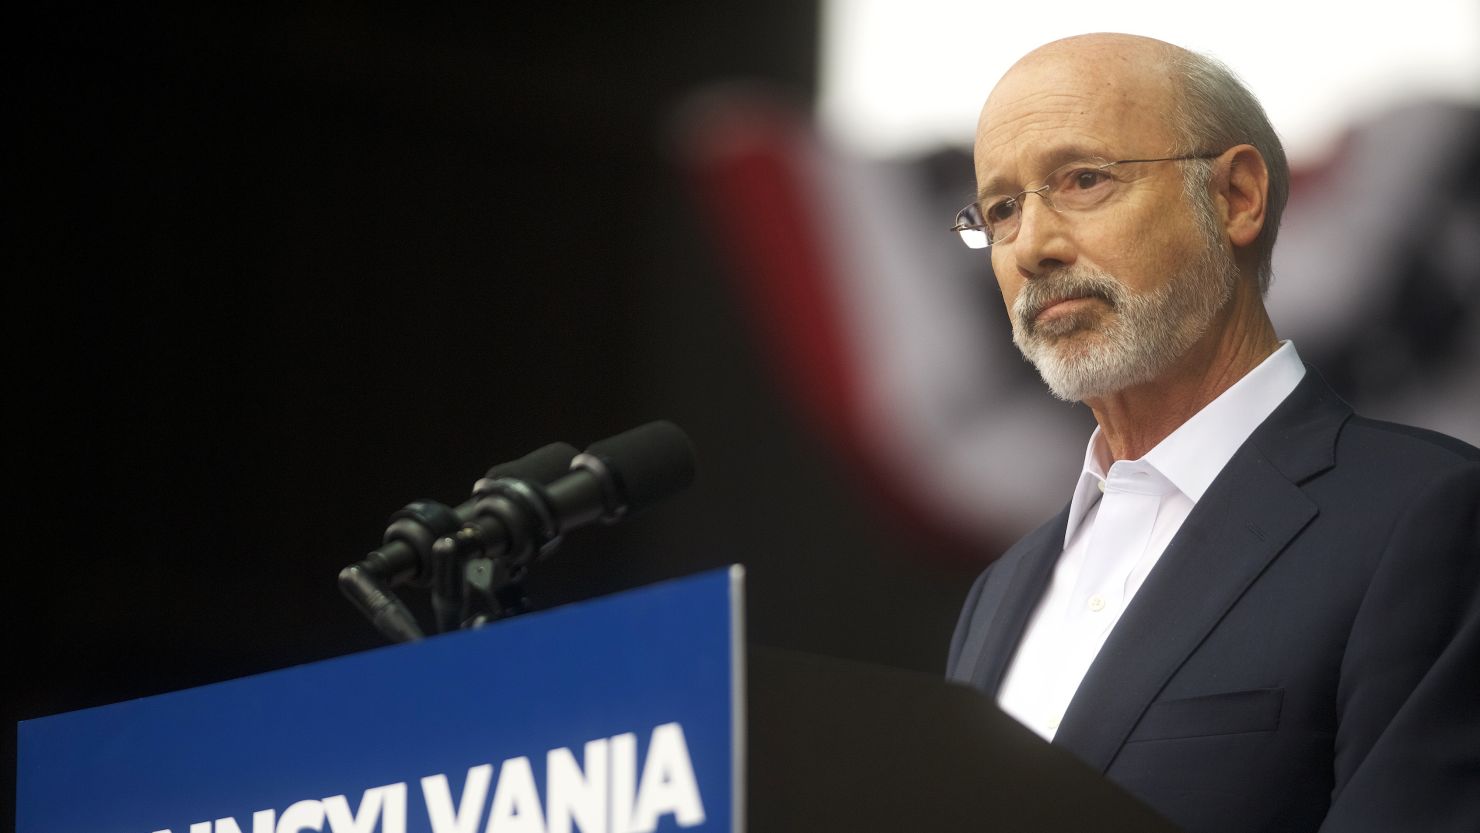 Pennsylvania Gov. Tom Wolf addresses supporters before former President Barack Obama speaks during a campaign rally for statewide Democratic candidates on September 21, 2018, in Philadelphia, Pennsylvania. 